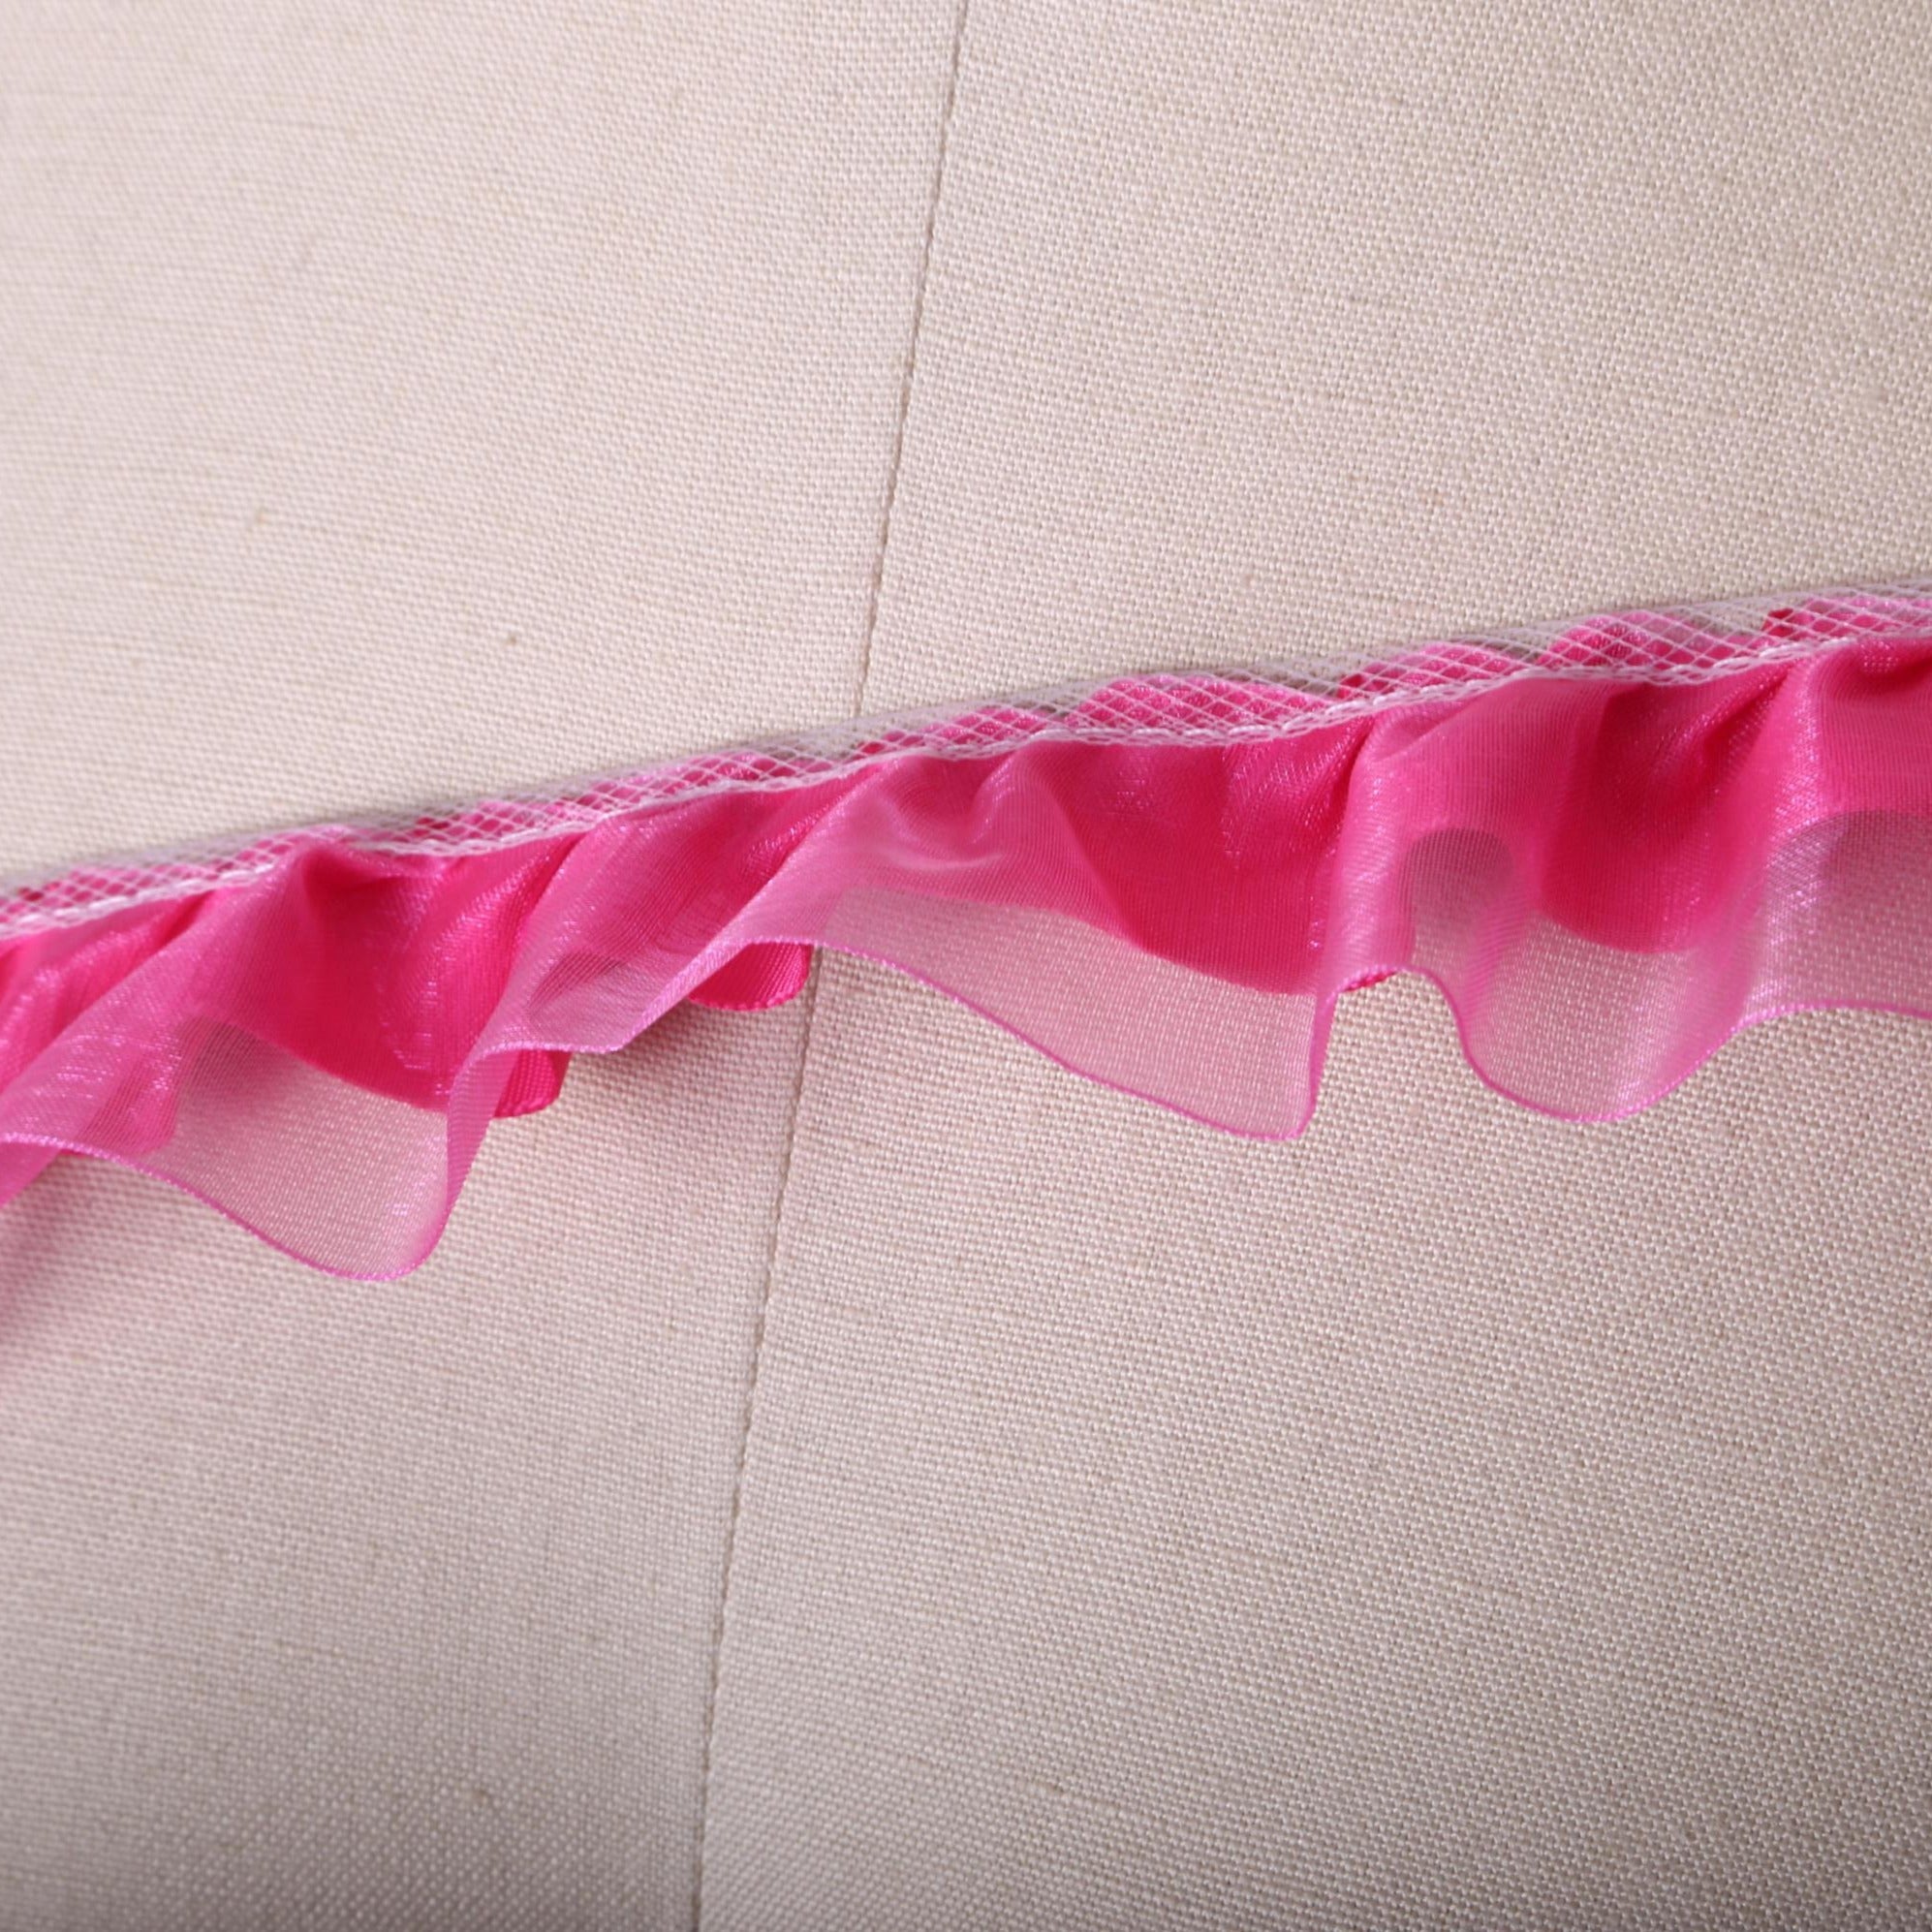 YYCRAFT 11 Yards Satin Ruffle Trim Fabric Trims and Embellishments by The  Yard, 1.5 Inch Hot Pink